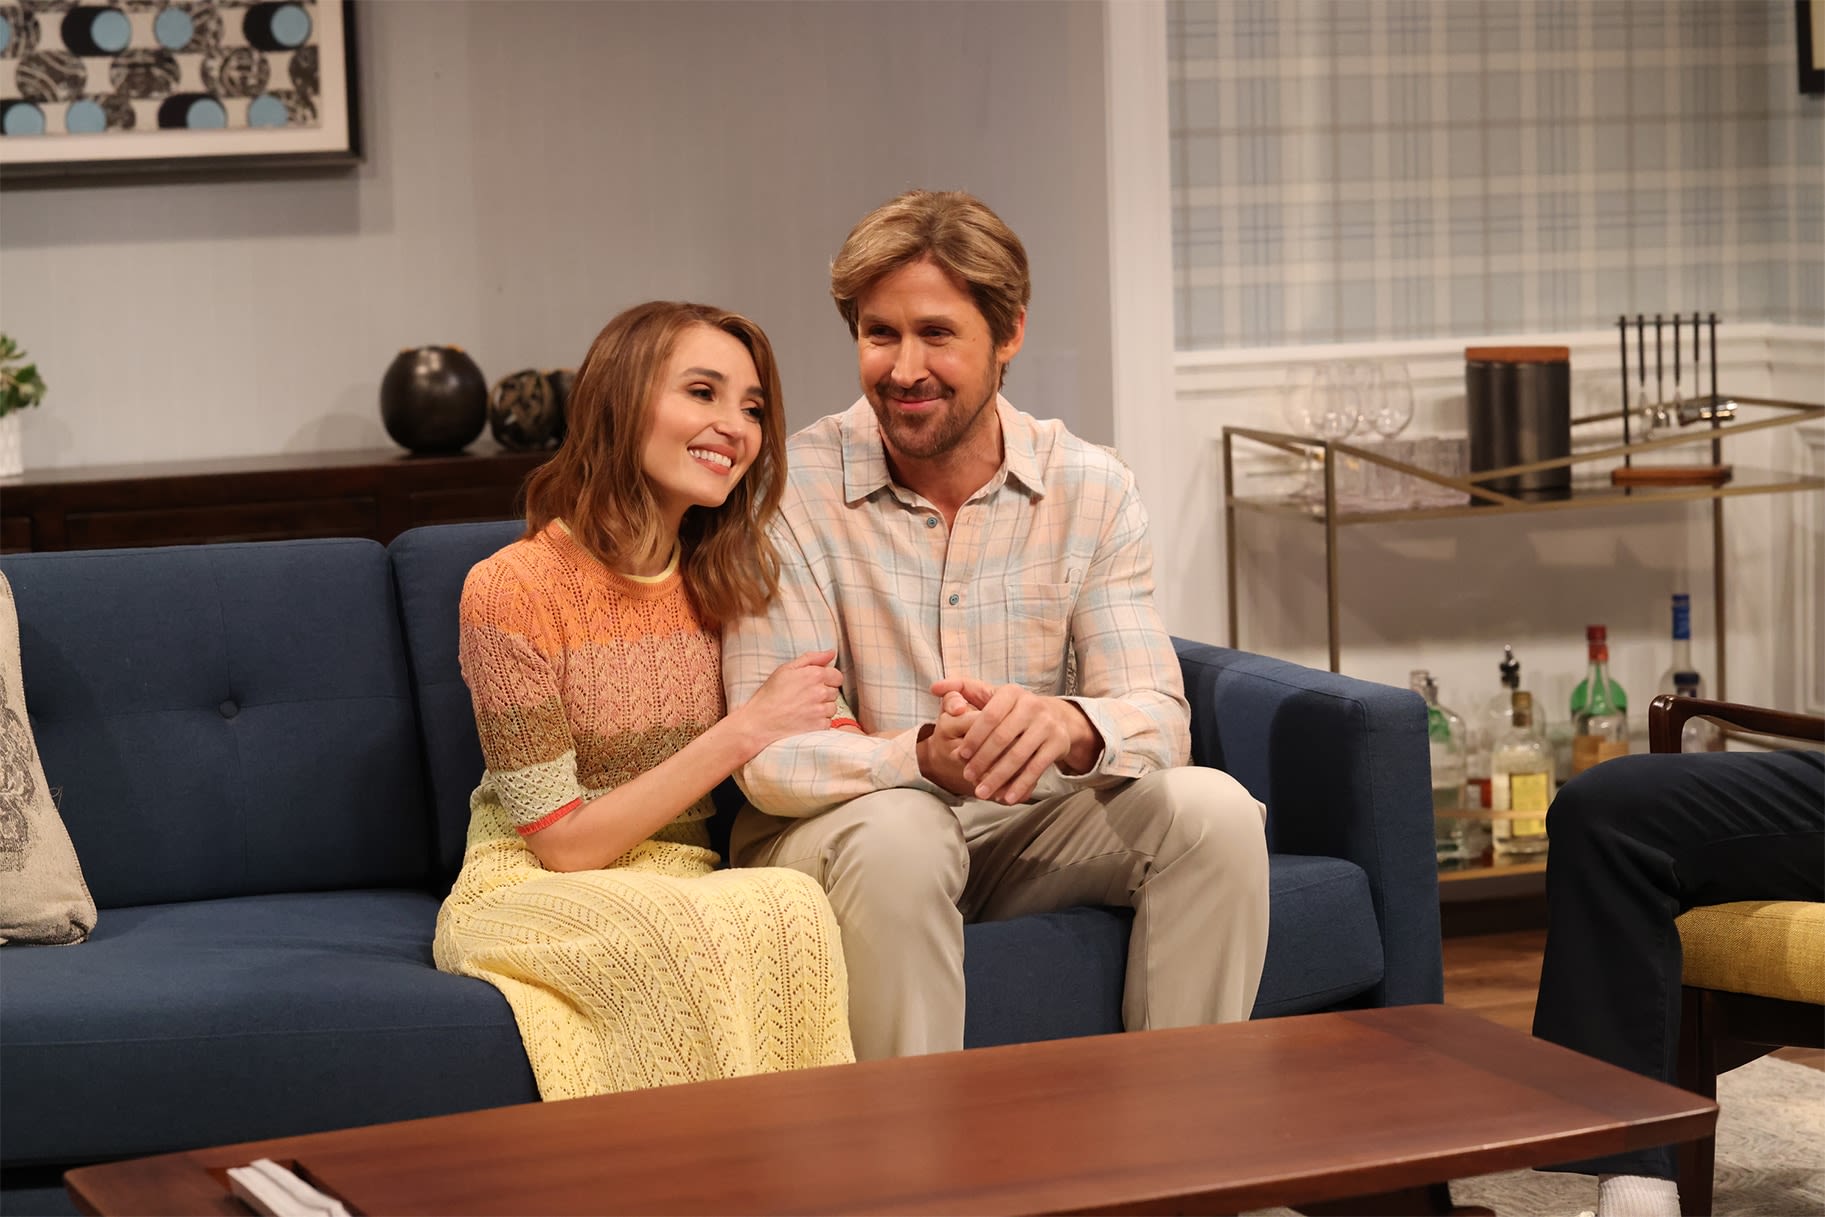 SNL Season 49 Bloopers: The Cast (and Ryan Gosling) Can't Stop Making Each Other Laugh